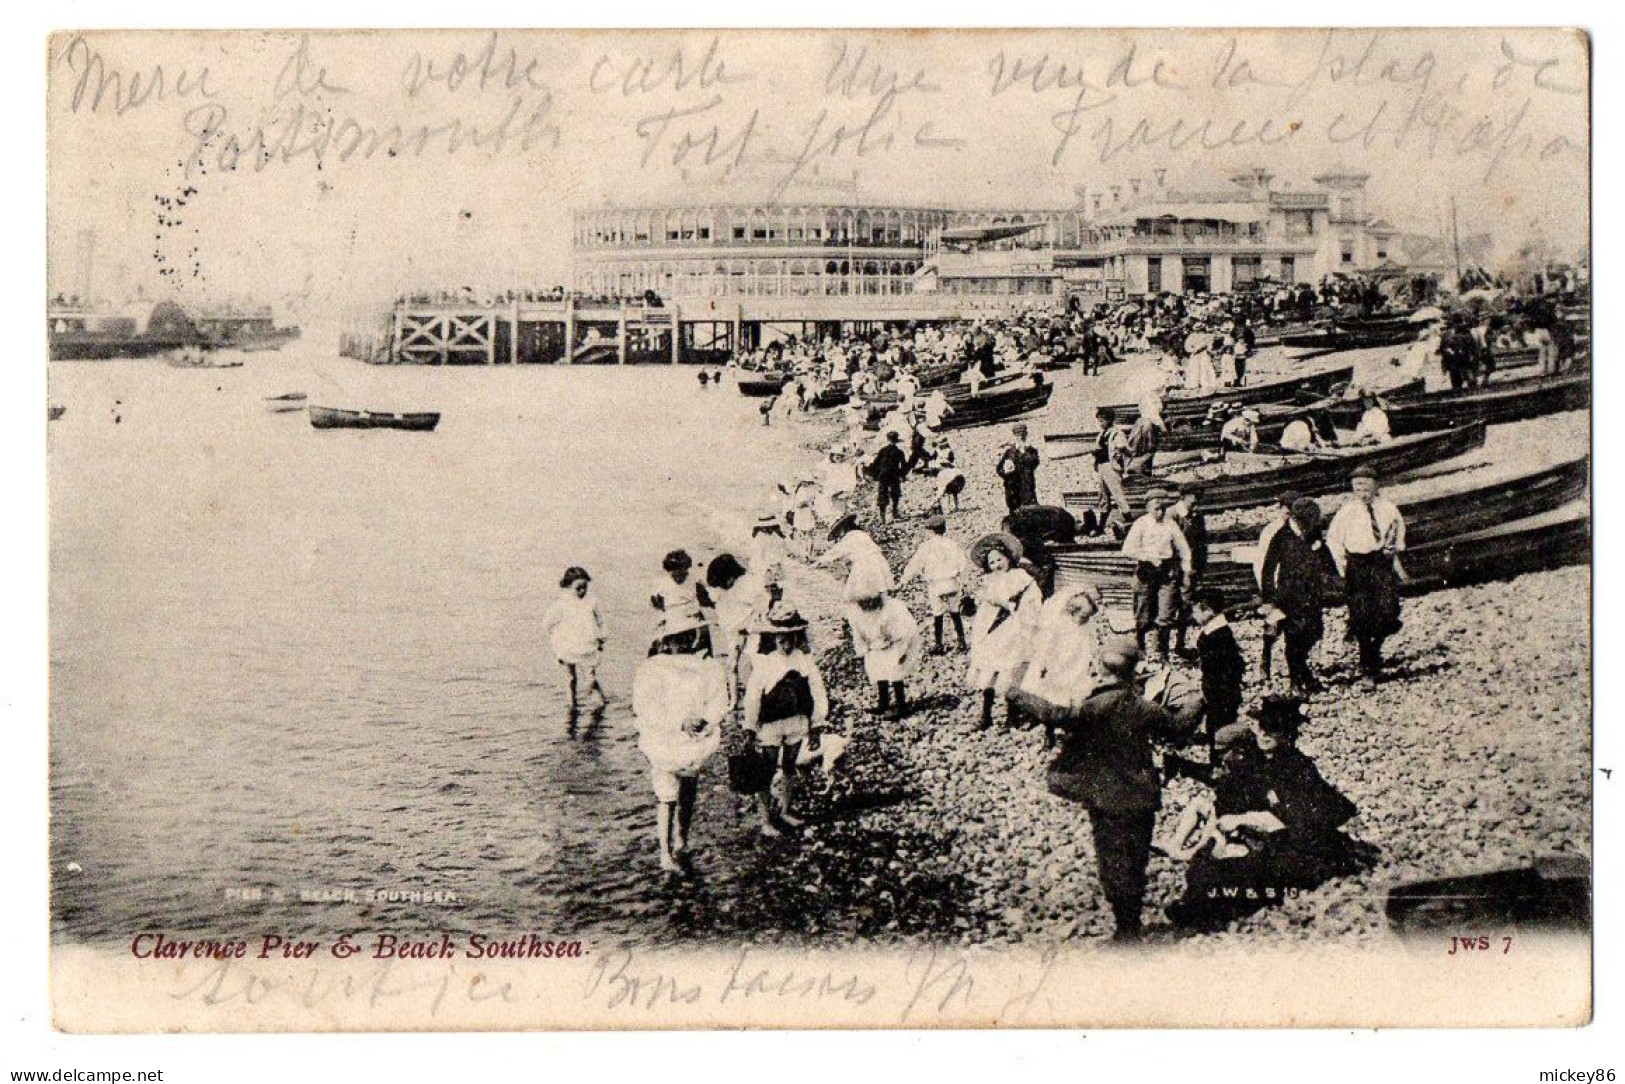 Royaume-Uni-- SOUTHSEA --1904 -- Clarence Pier & Beach.timbre--cachet.ROMILLY / SEINE-10 (France) - Southsea